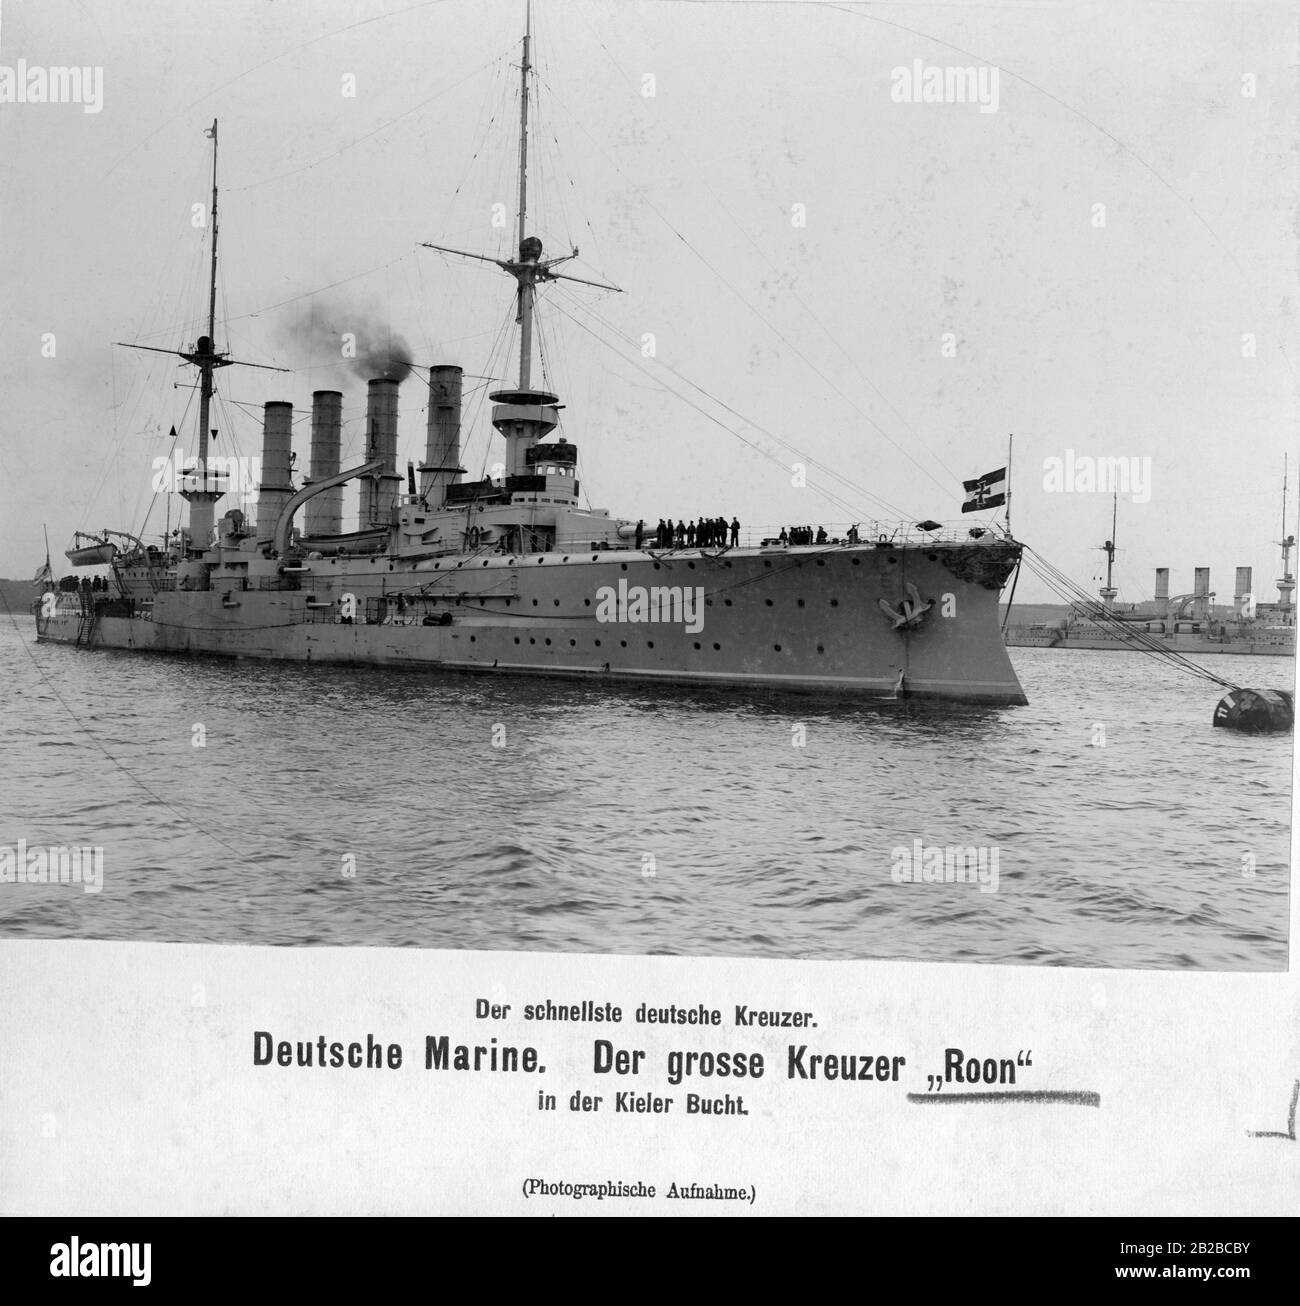 The large cruiser of the Imperial Navy 'SMS Roon' in the Bay of Kiel. It was named after the Prussian Field Marshal Albrecht von Roon and was used during the First World War. Stock Photo